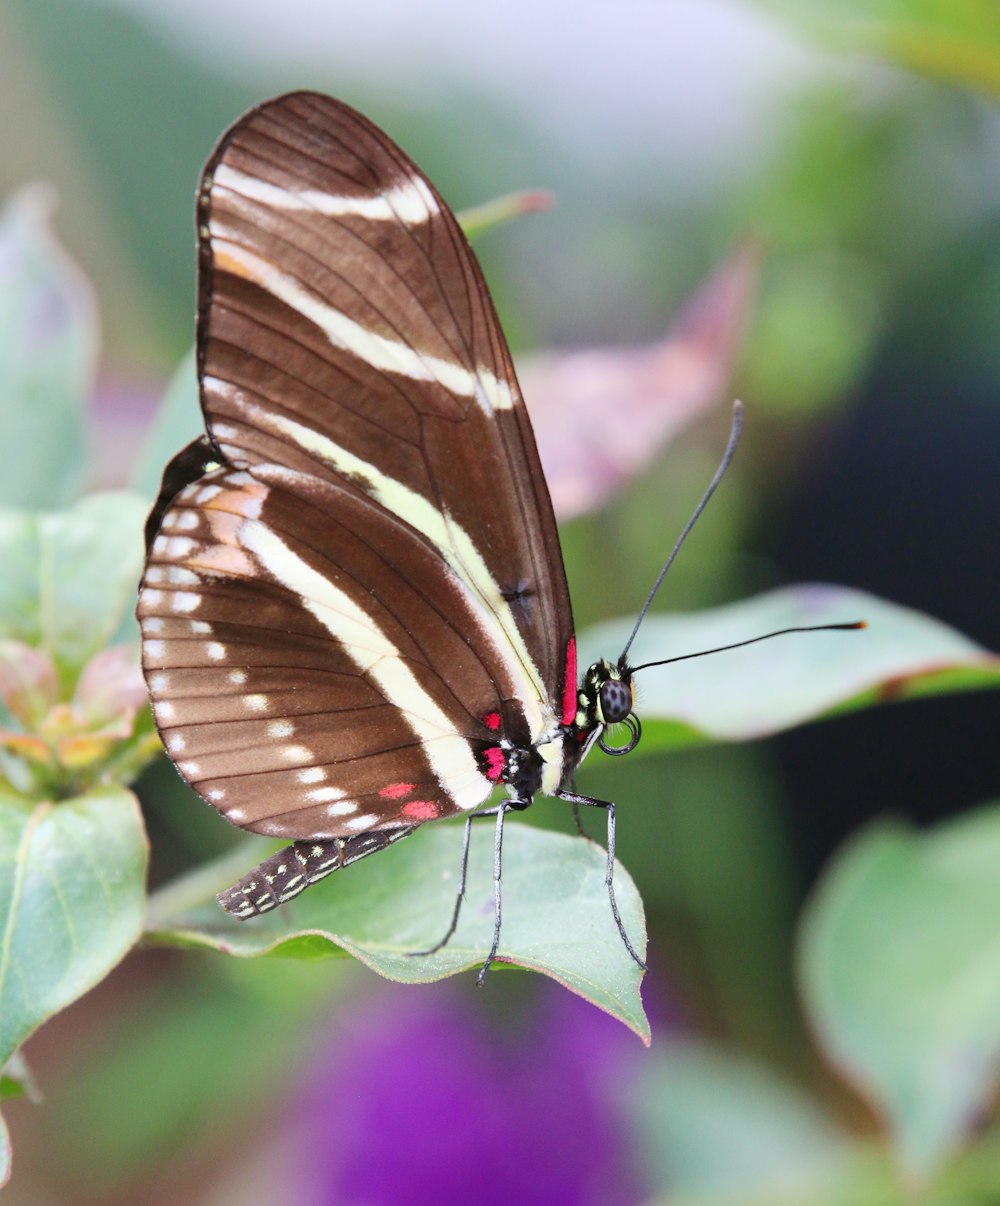 a brown and white butterfly sitting on a green leaf